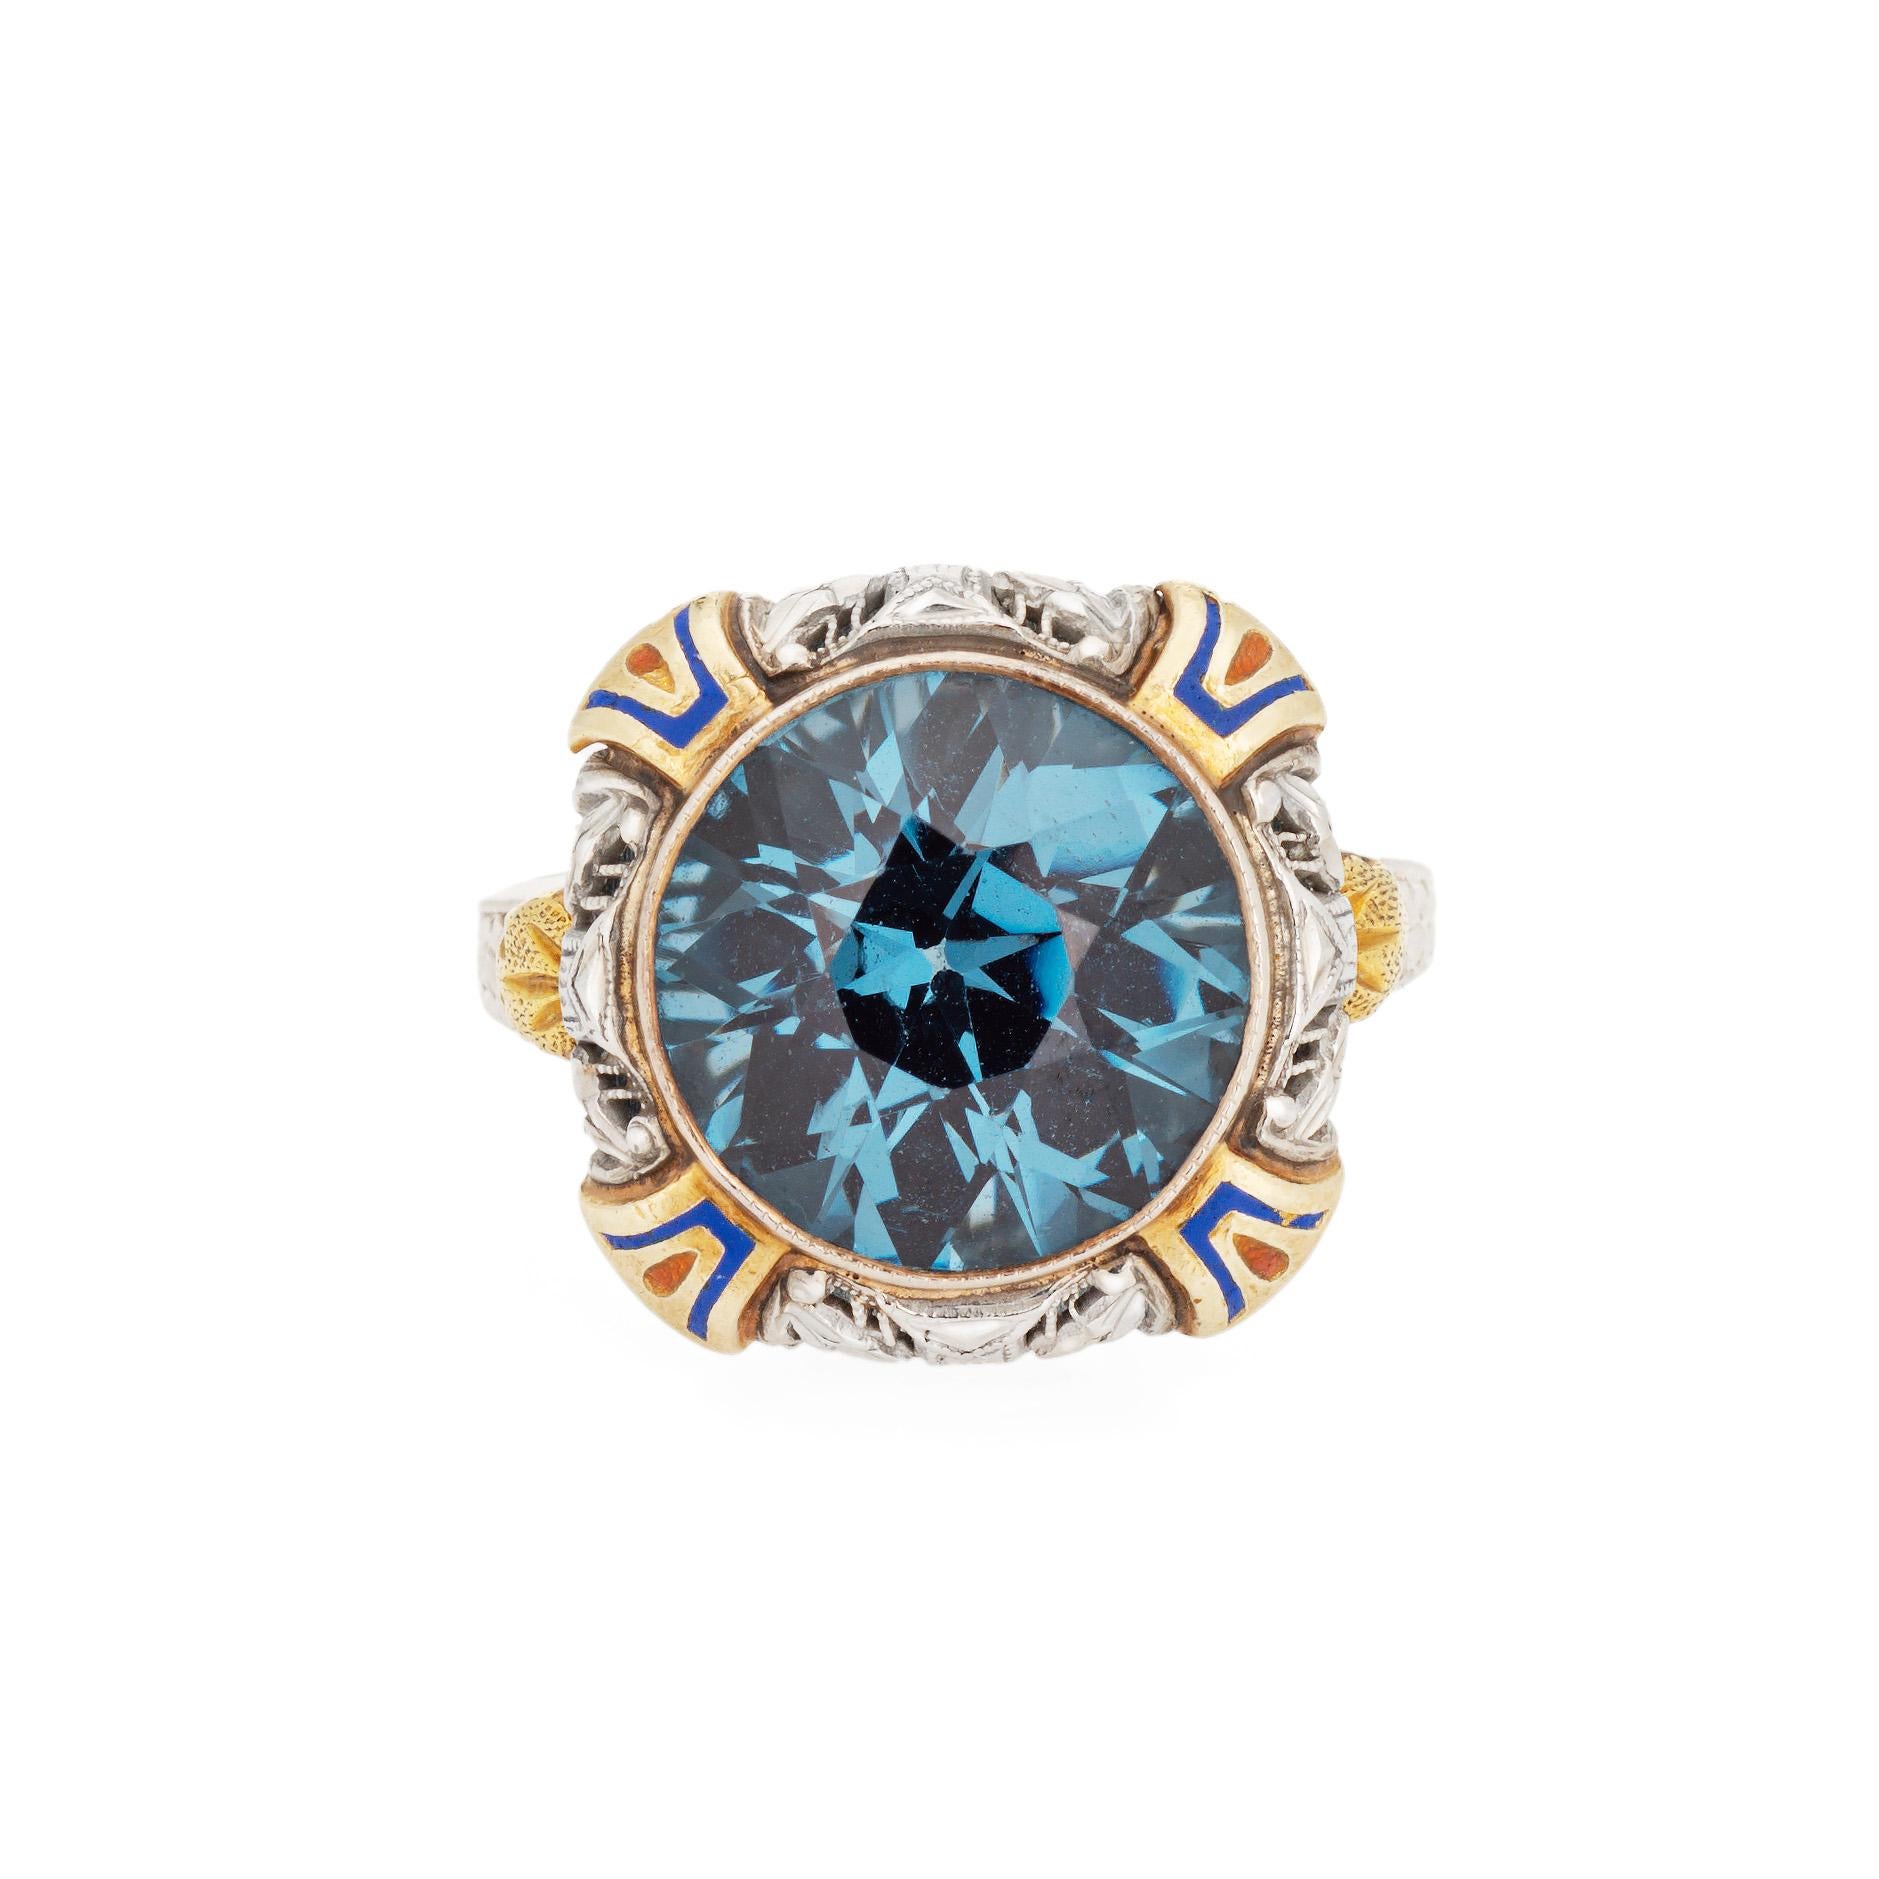 Vintage Art Deco era enamel cocktail ring (circa 1920s to 1930s) crafted in 14 karat white & yellow & white gold.

Blue and green enamel accents frame a faceted oval cut synthetic blue stone to the center, measuring 11mm. Note: few light surface